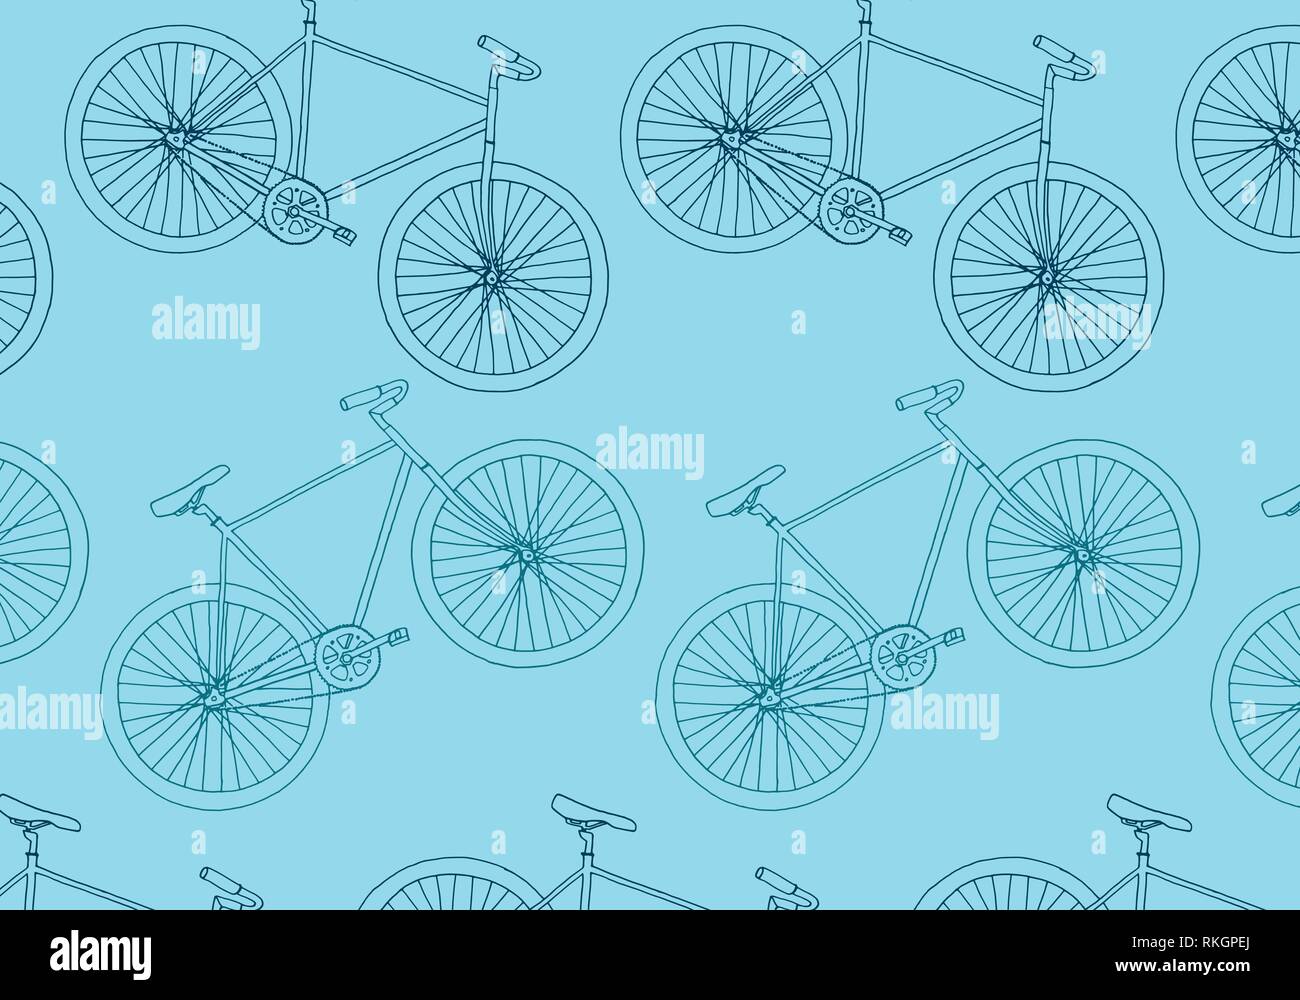 Hipster bike vector pattern illustration in gray and turquoise blue colors palette Stock Vector